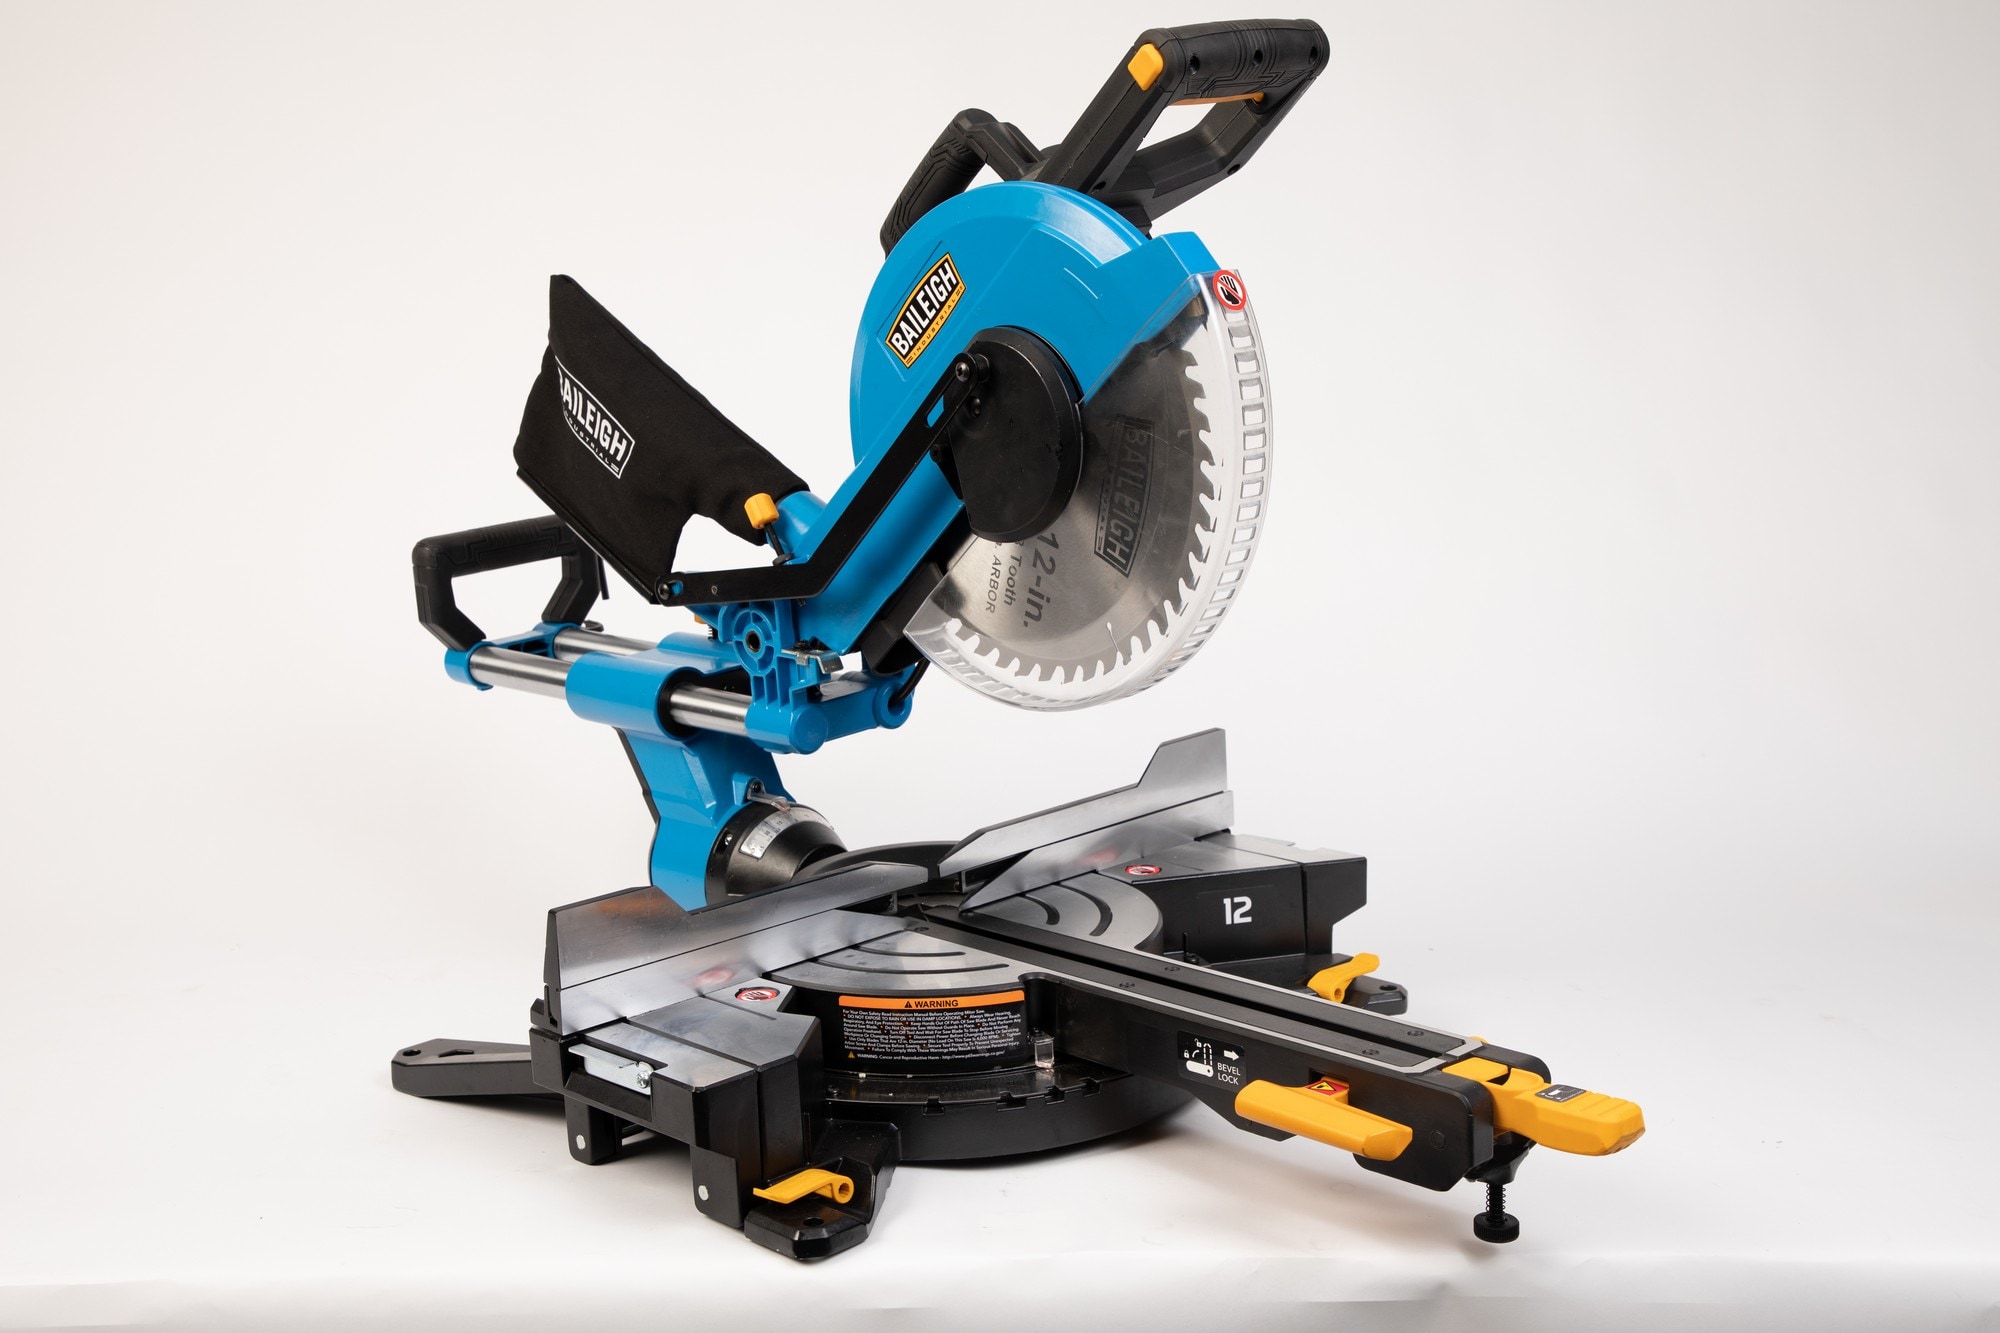 BMS-12-in 15-Amp Worm Drive Dual Bevel Sliding Compound Corded Miter Saw | - Baileigh Industrial 1231859